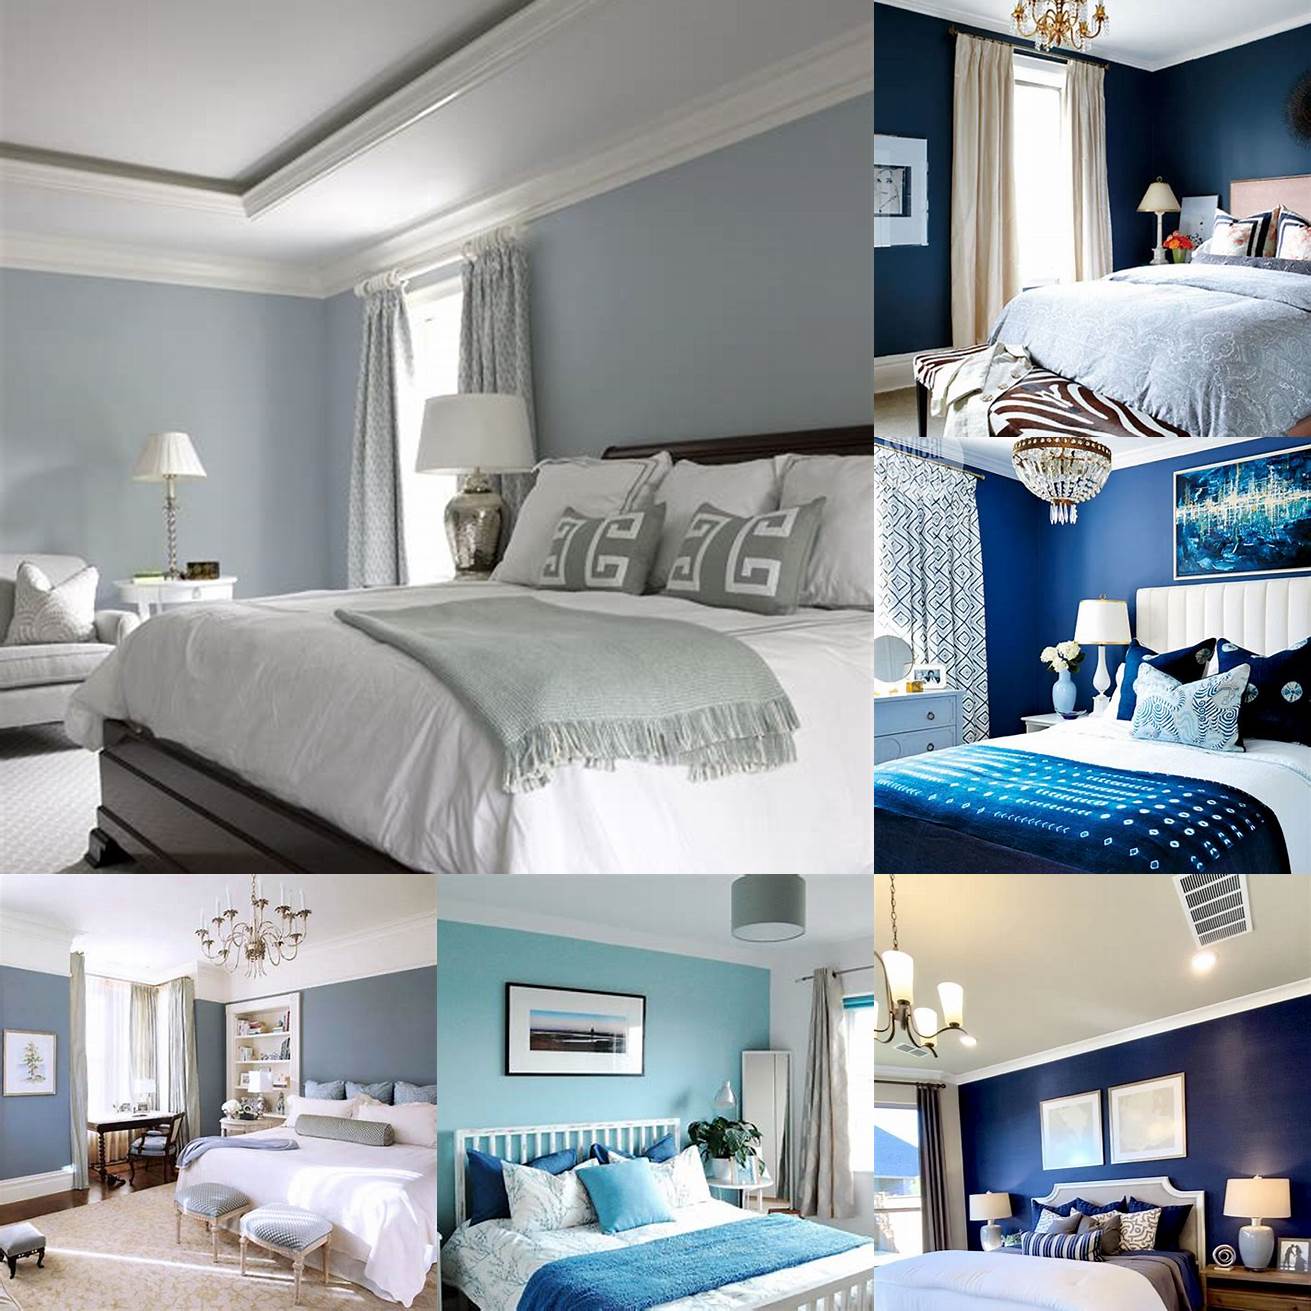 Image Idea White bedroom with blue accent colors